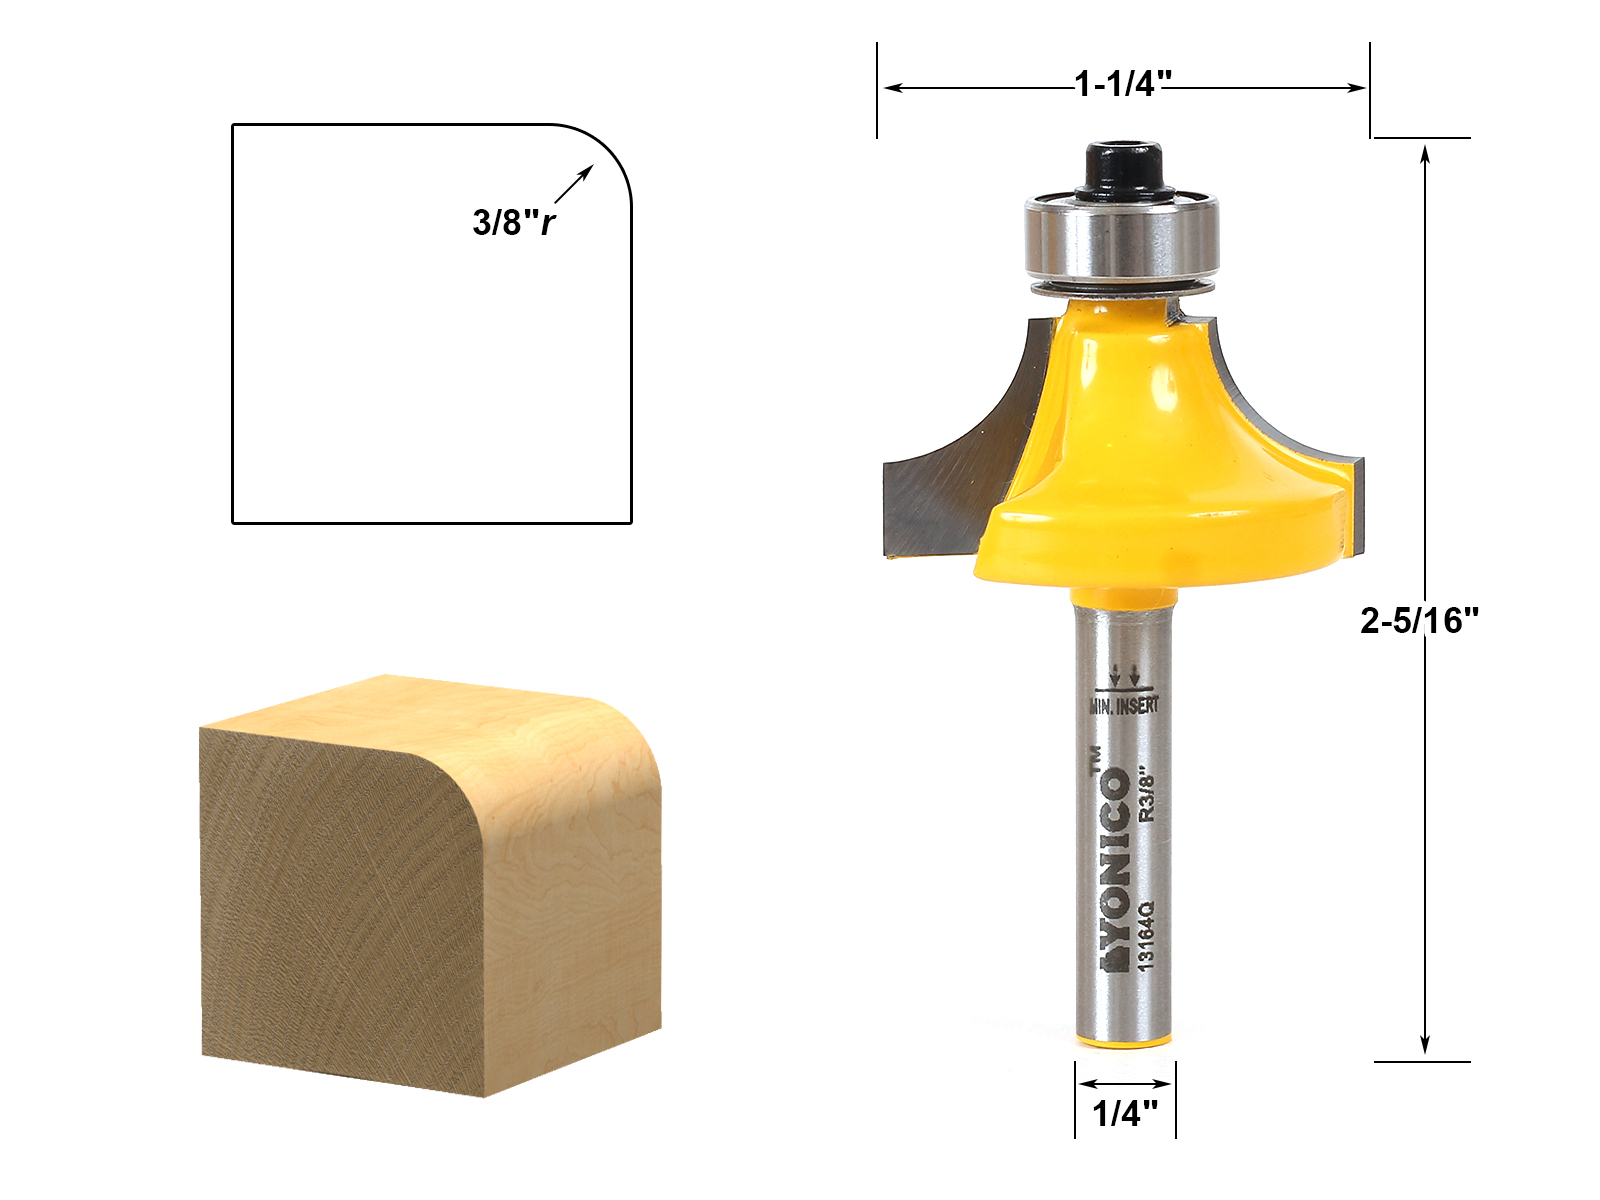 3/8" Radius Round Over Edge Forming Router Bit - 1/4" Shank - Yonico